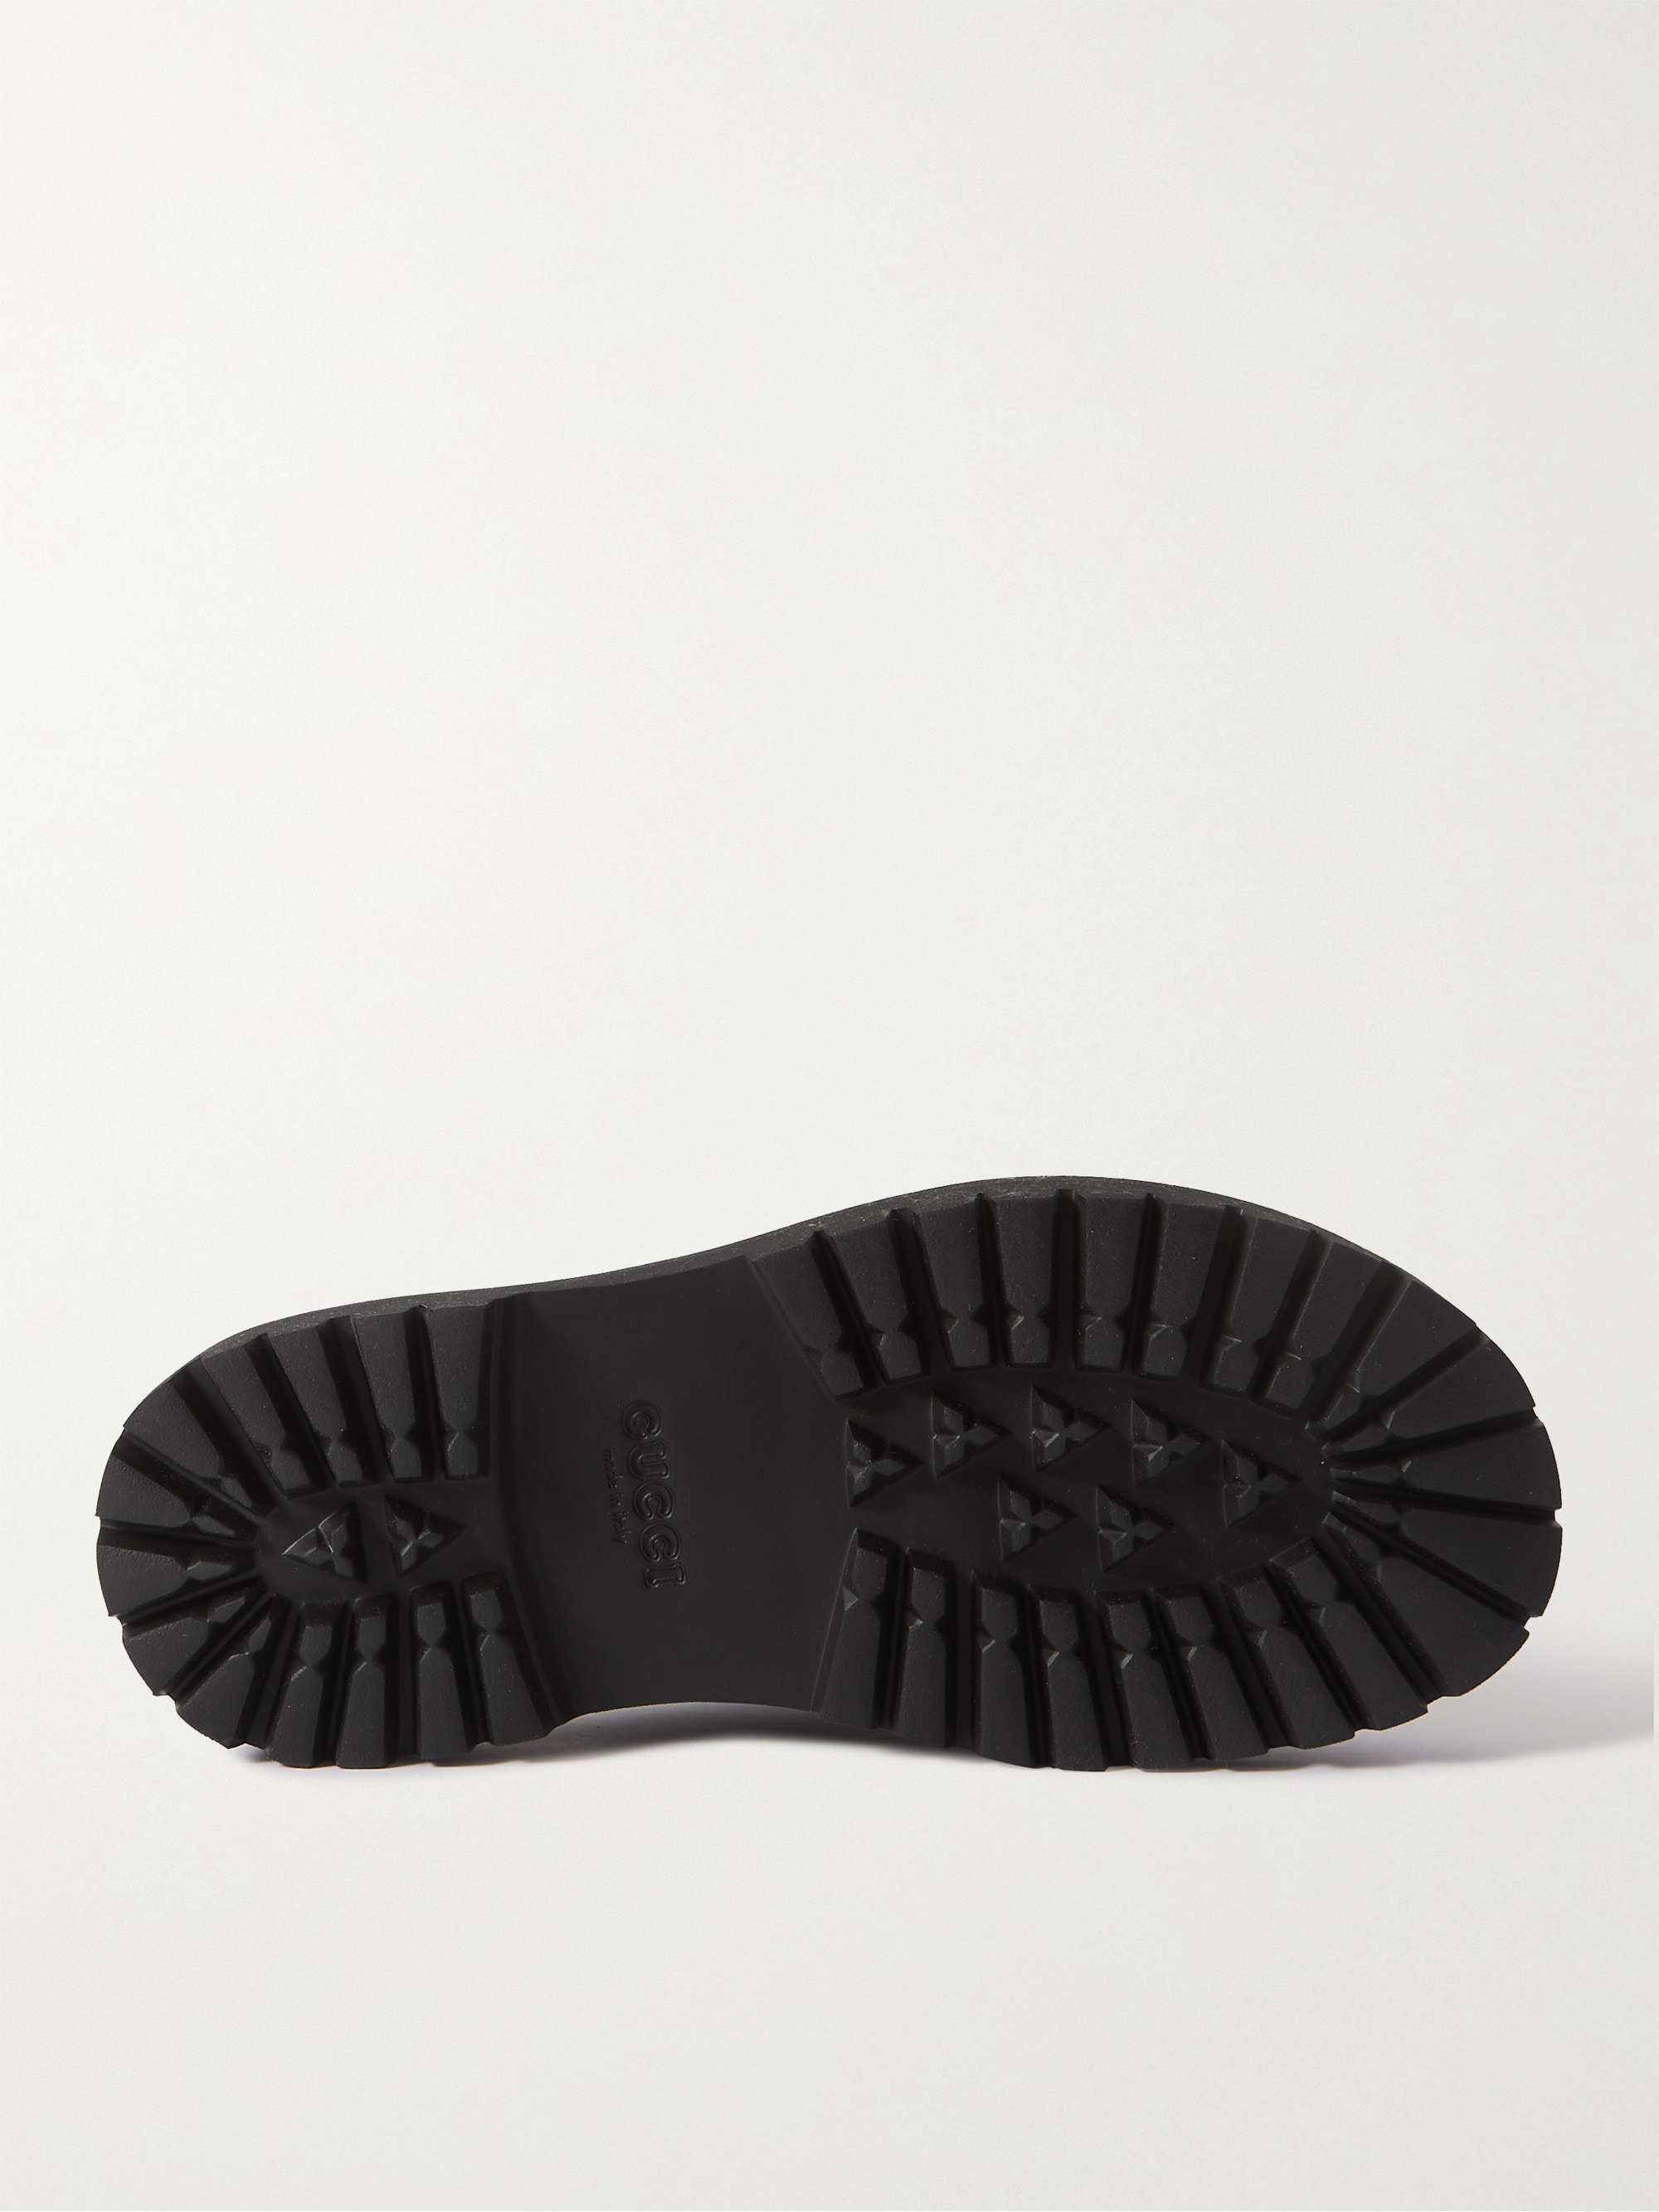 GUCCI Logo-Perforated Rubber Clogs